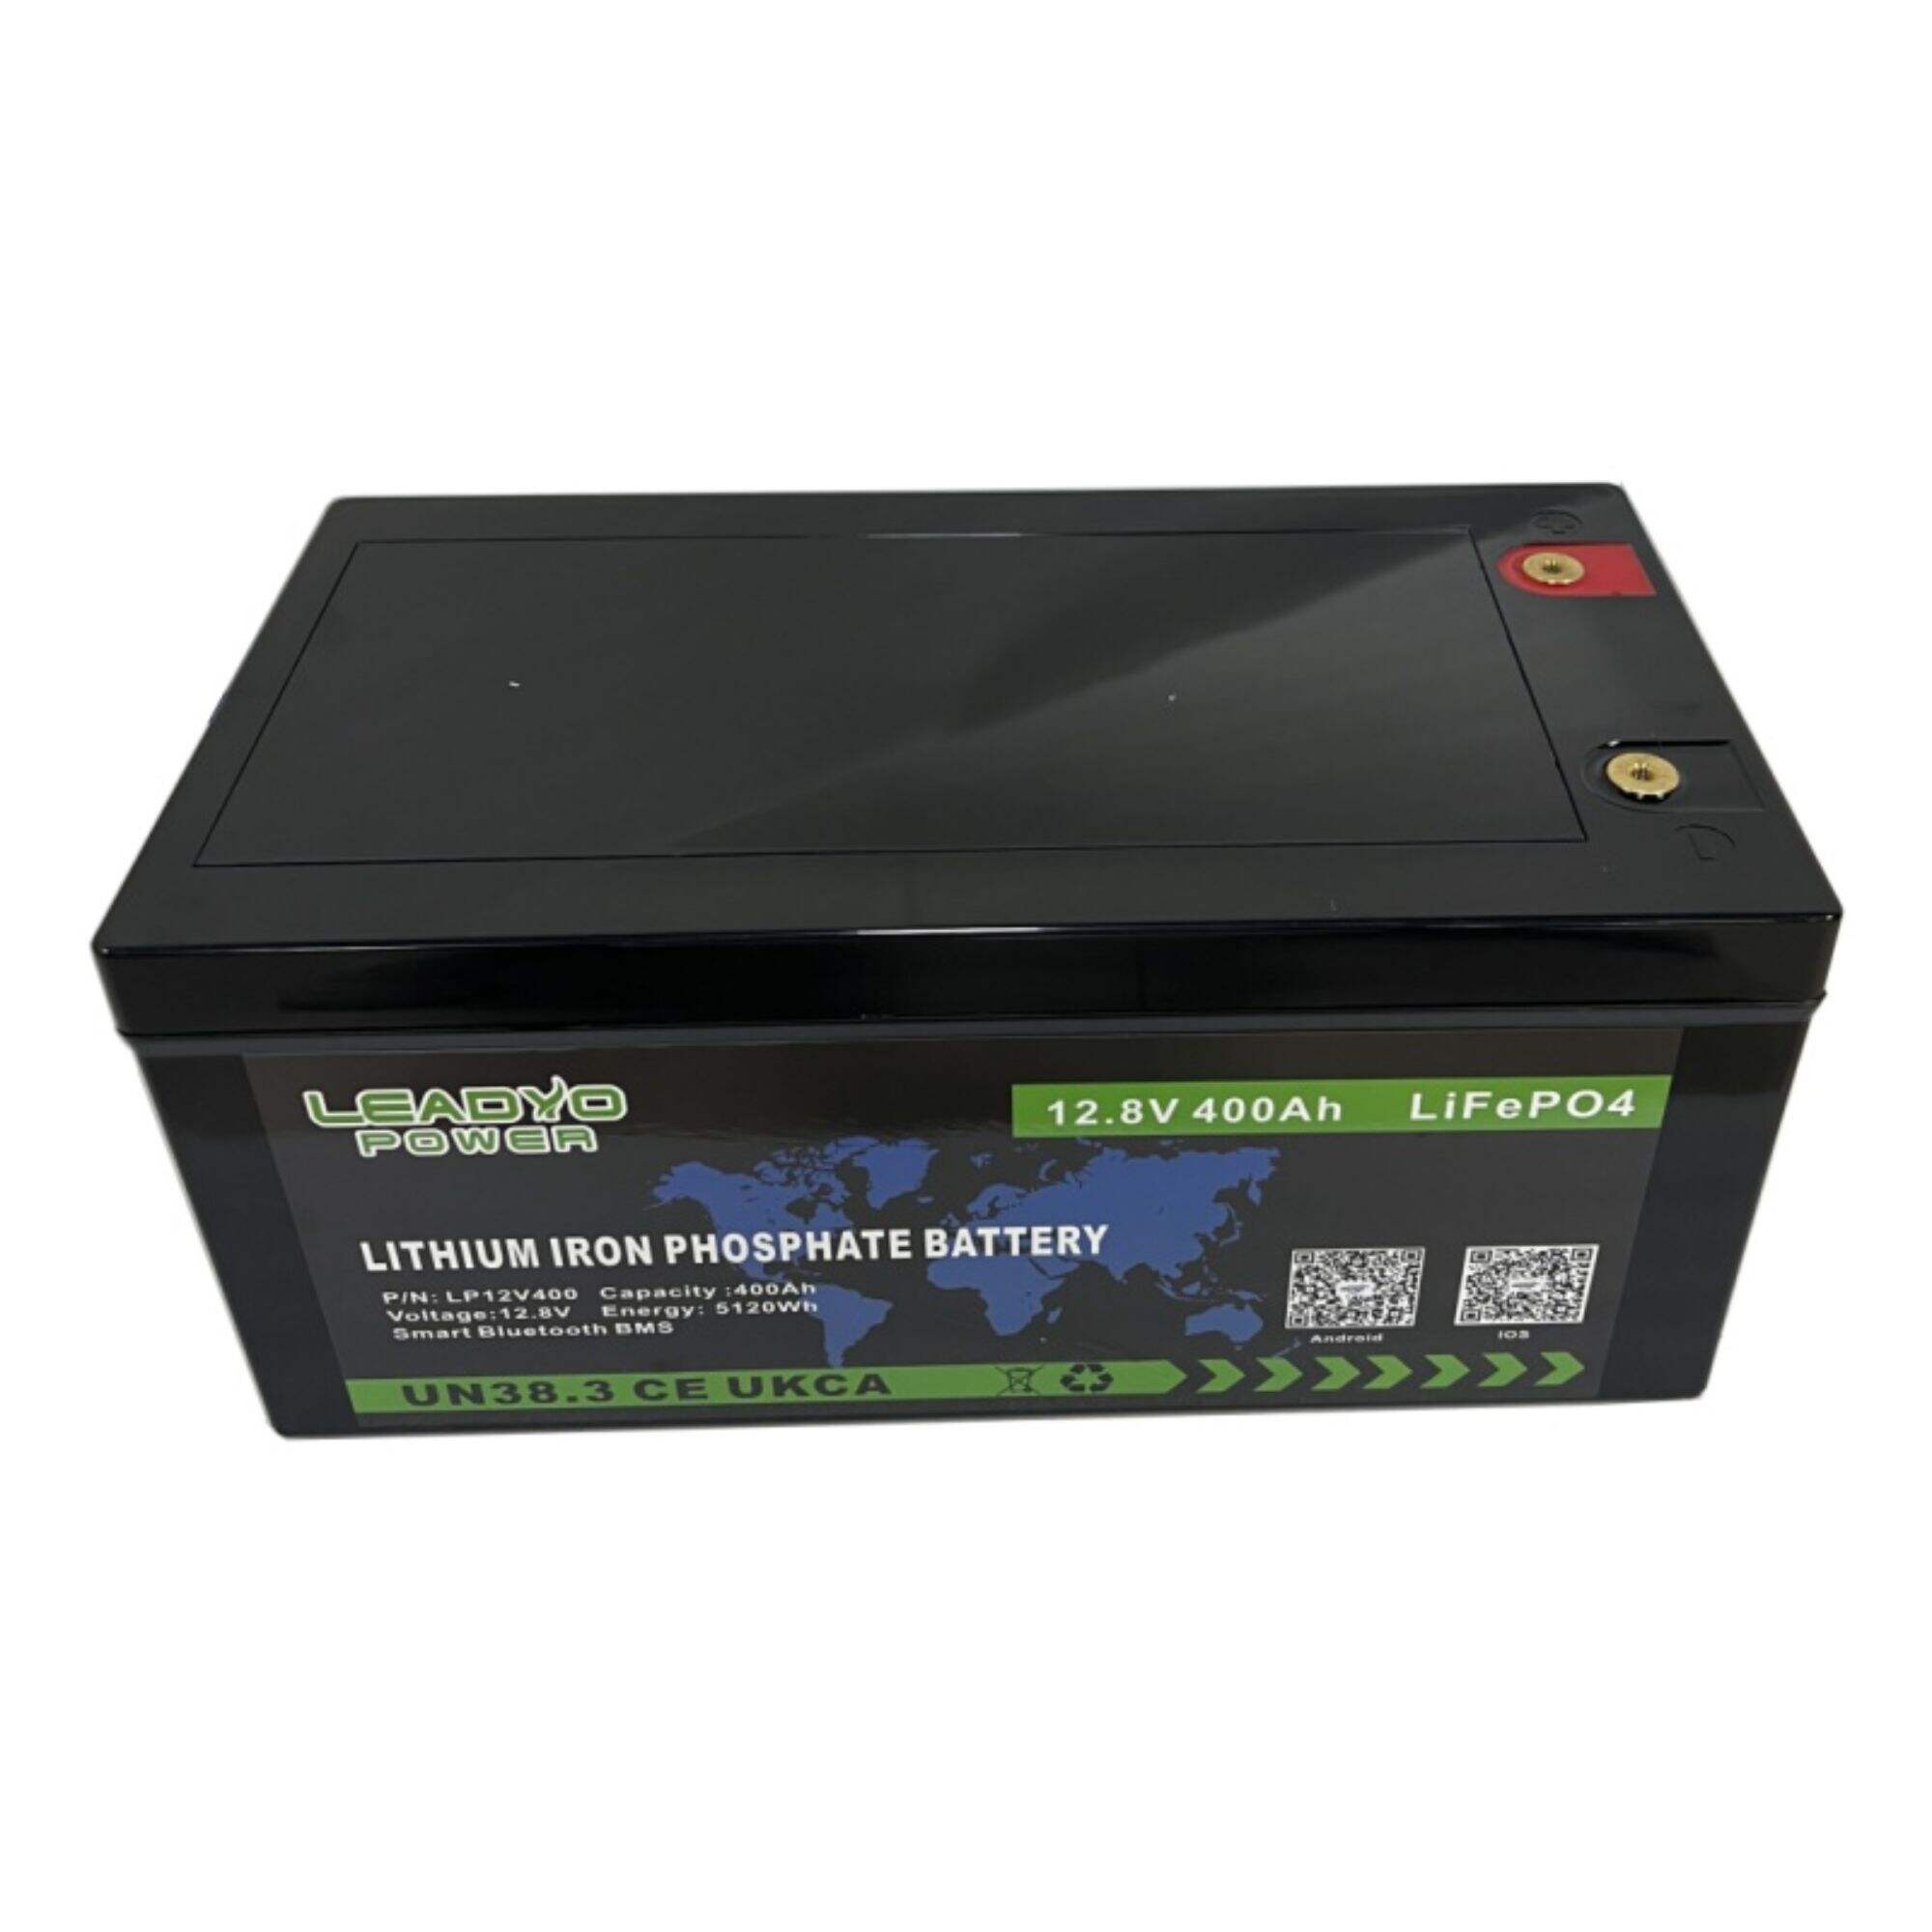 Deep Cycle LiFePO4 12V 400Ah Lithium Iron Phosphate Battery Pack For RV 12.8V LFP Batteries